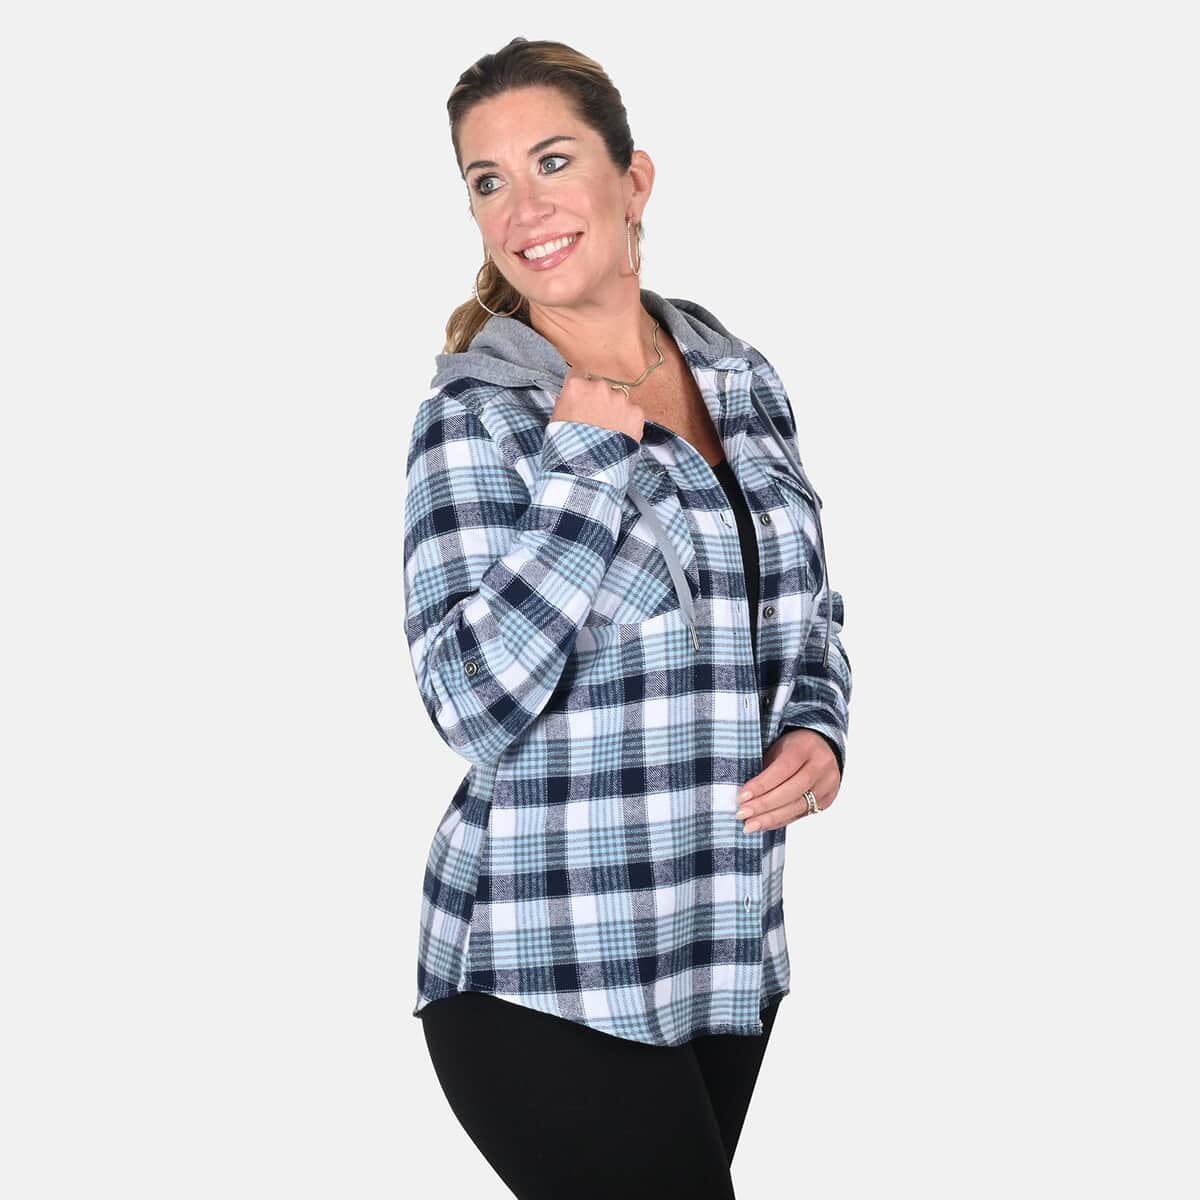 Victory Sportswear Blue and White Plaid Pattern Cotton Shirt with Fleece Hood -L image number 4